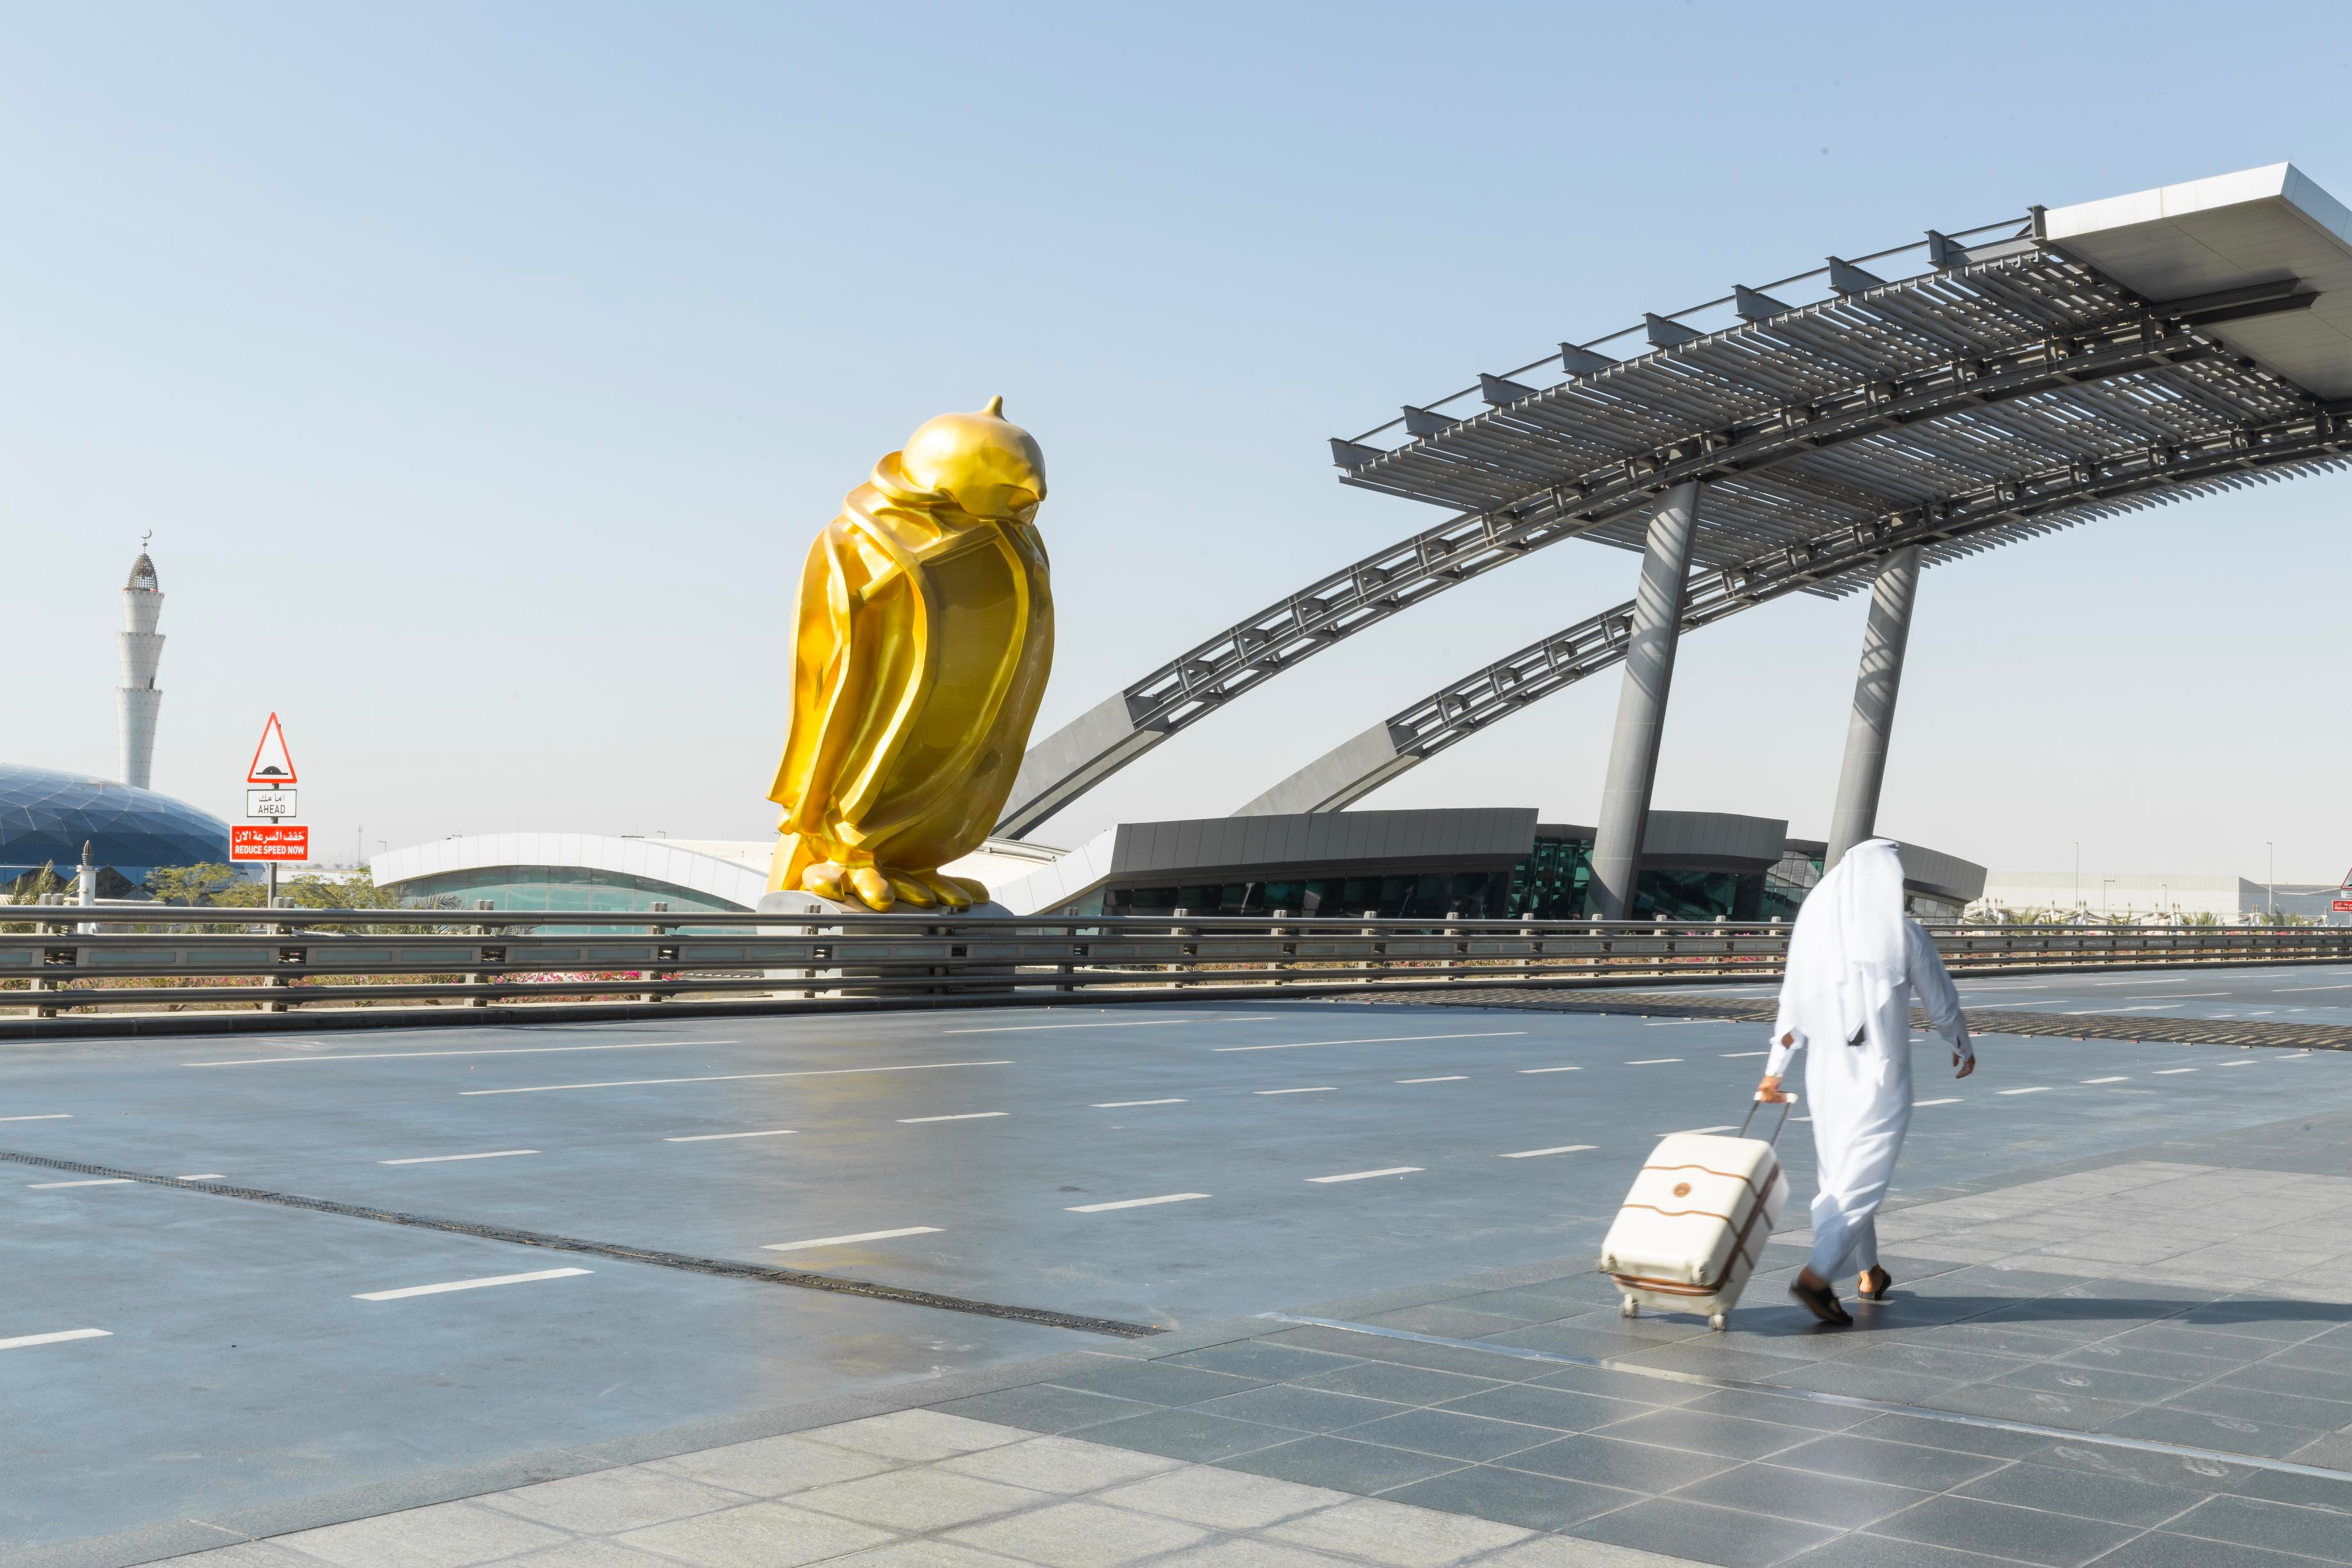 From airports to stadiums, visitors will discover a trove of Qatari public art